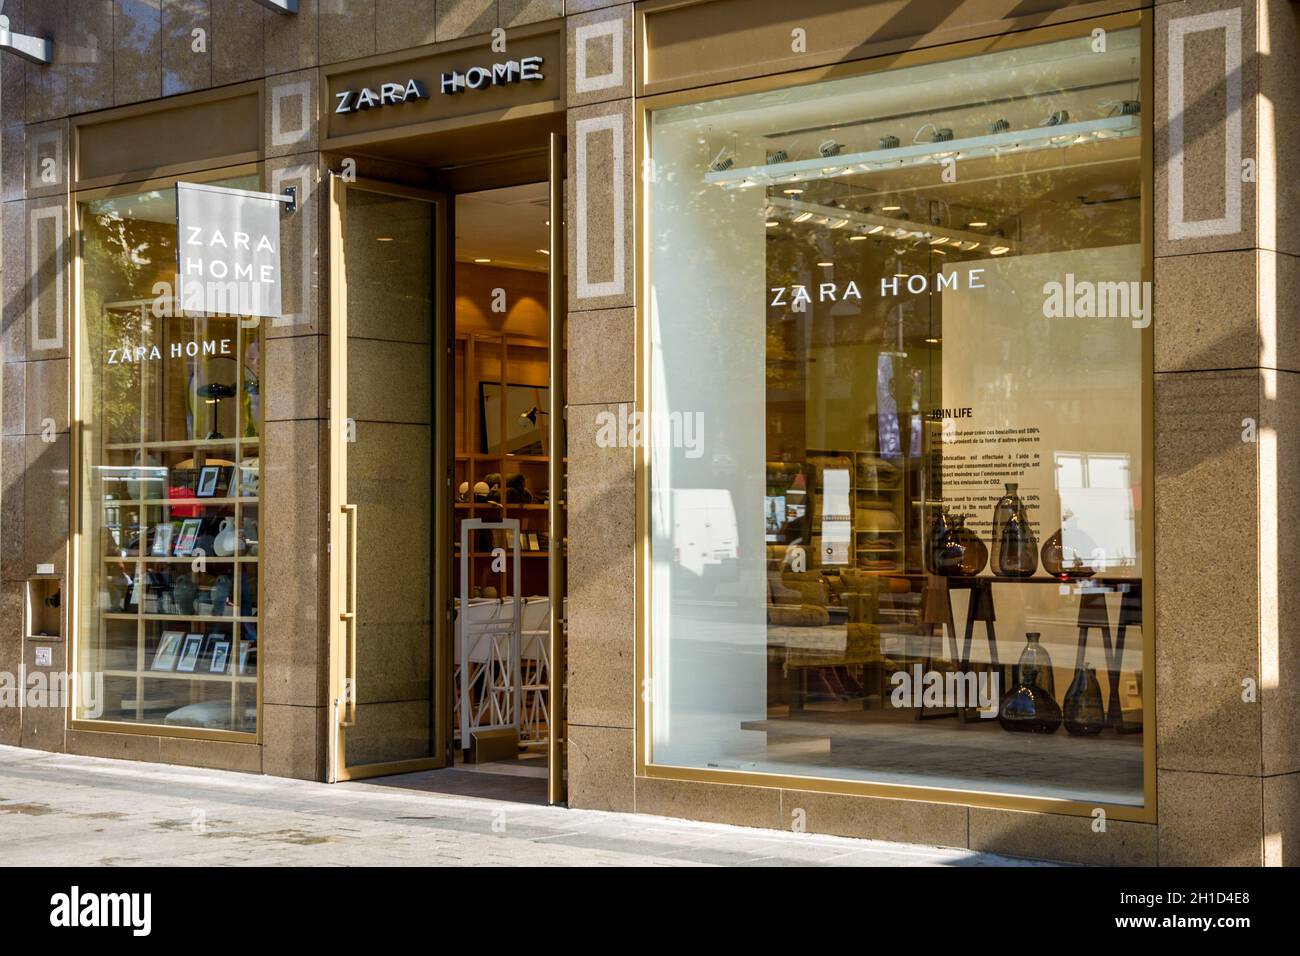 Paris/France - September 10, 2019 : The Zara Home store on Champs-Elysees  avenue Stock Photo - Alamy